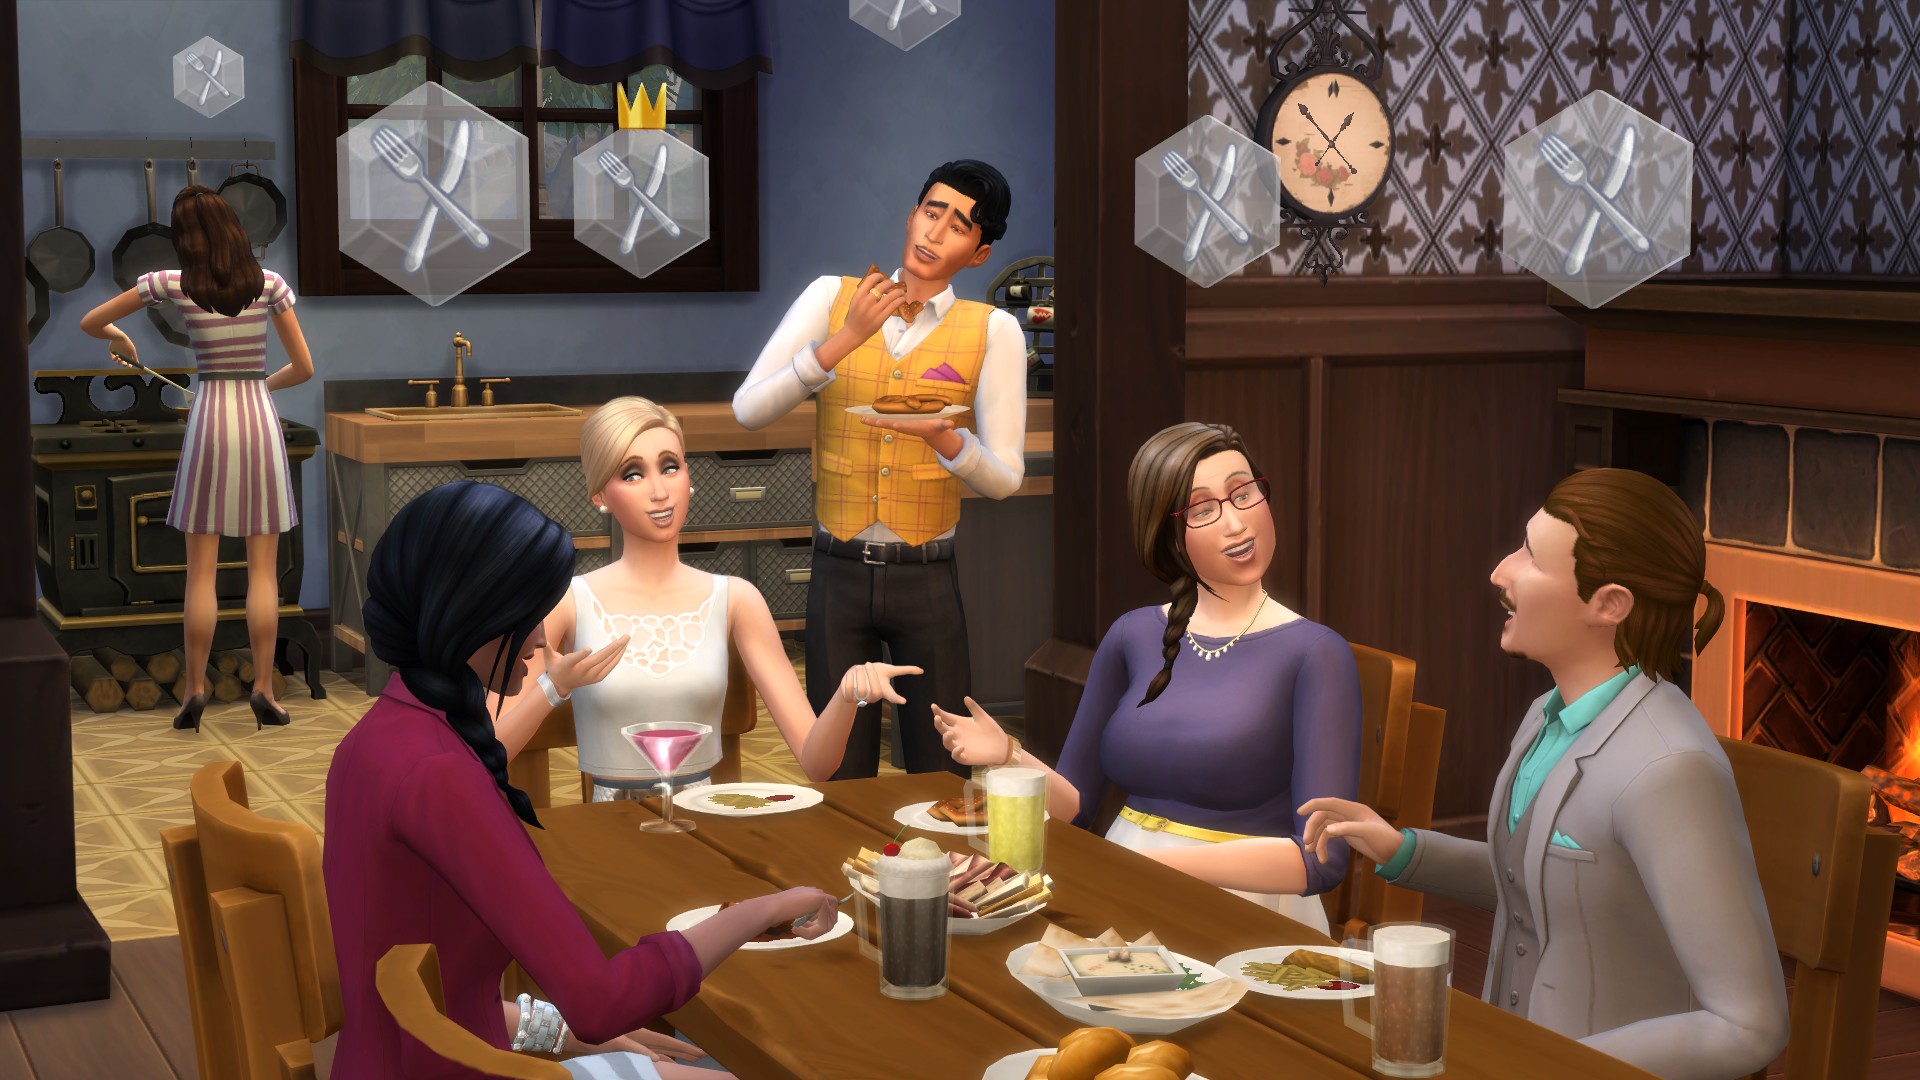 10 Reasons You’ll Love The Sims 4 Get Together Expansion Pack on Xbox One